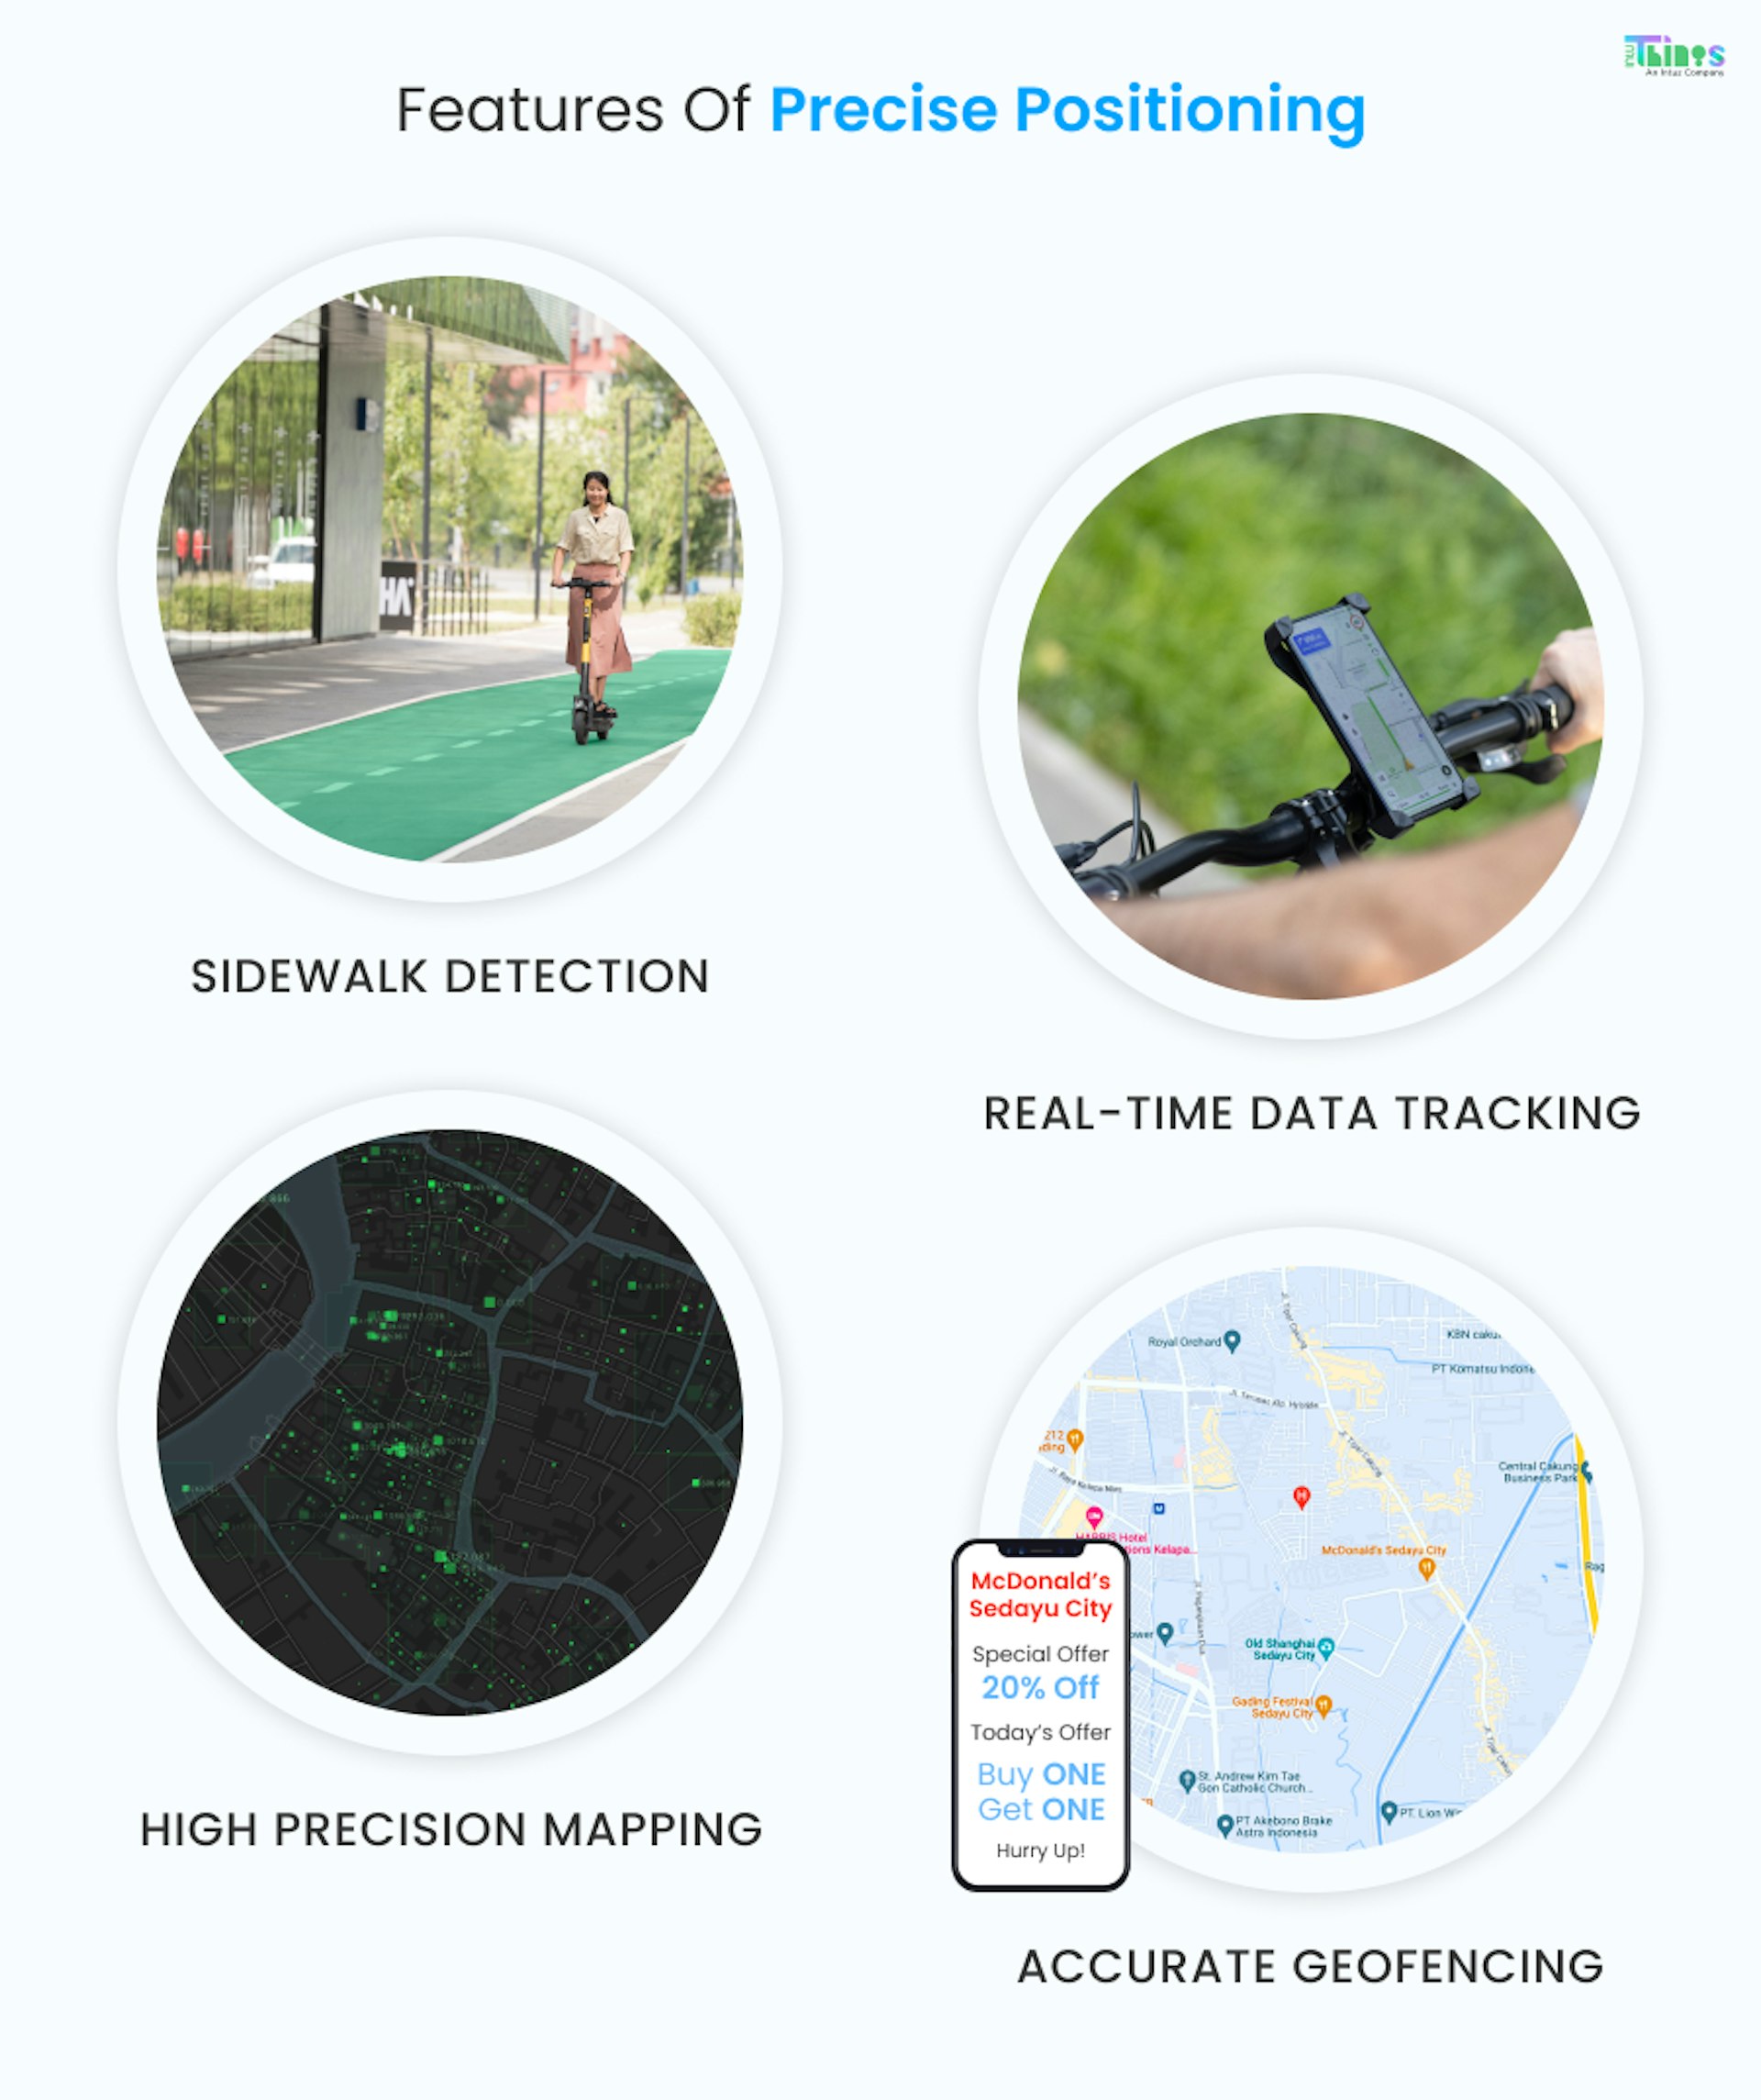 Features of precise positioning